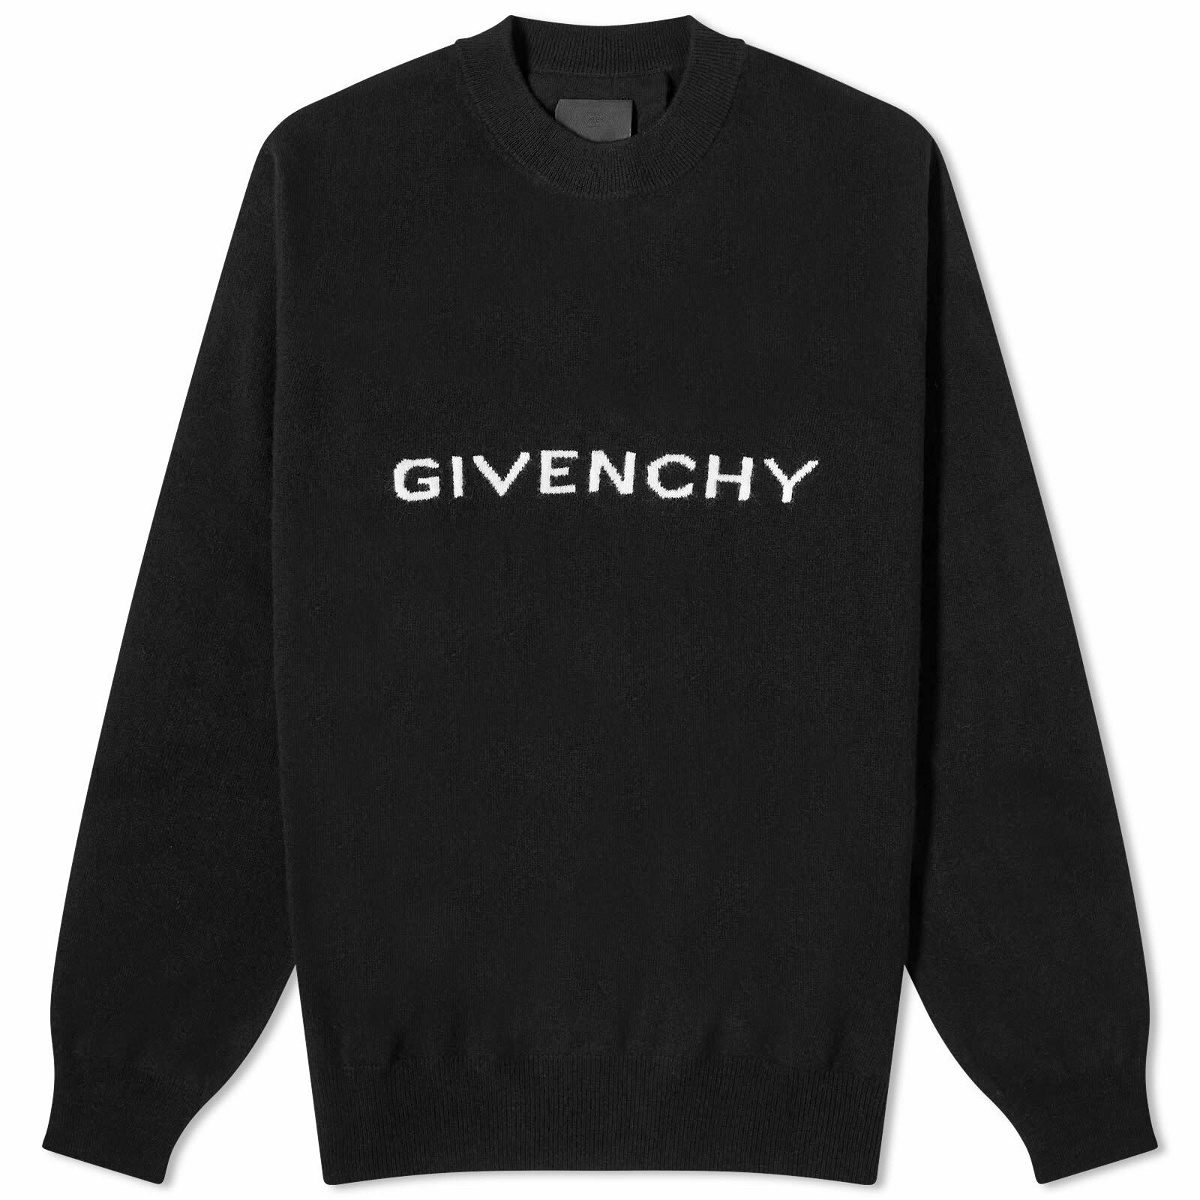 Givenchy - Knitted Hooded Rollneck Sweater - Black Givenchy